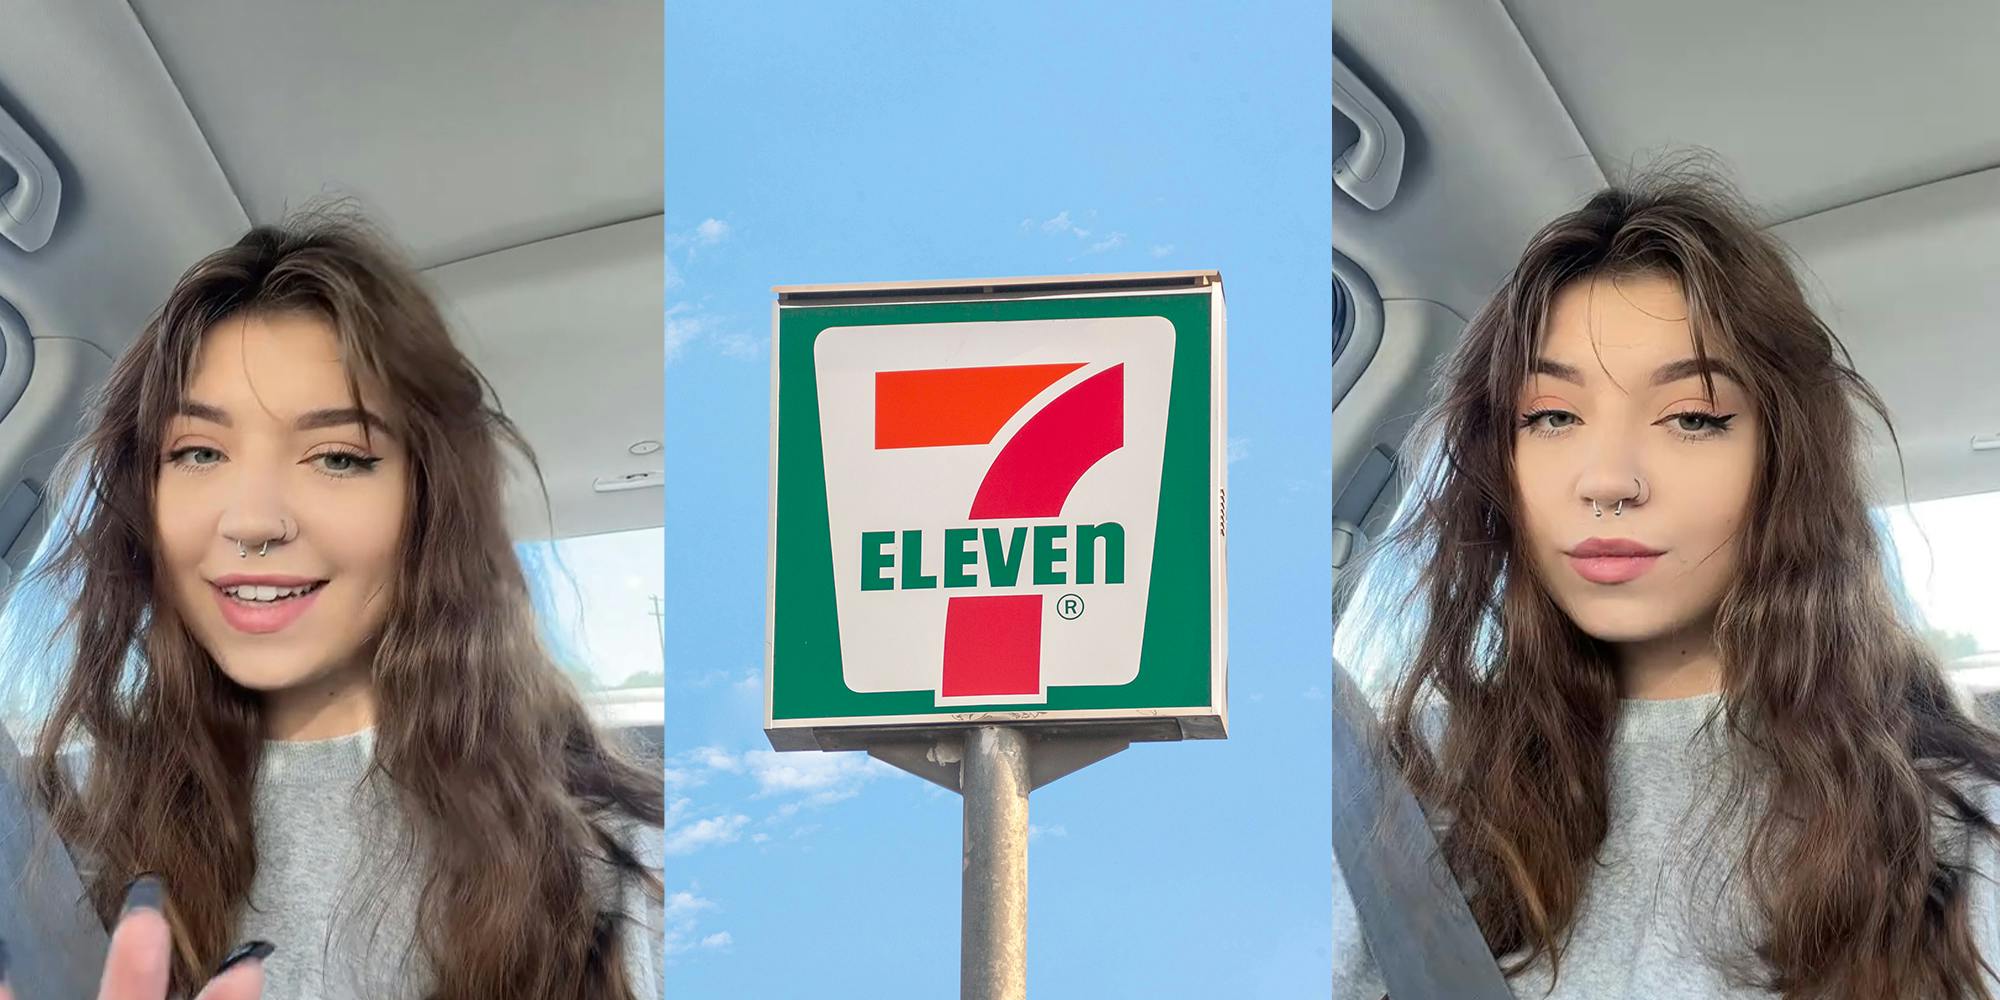 Woman Smiling; 7 Eleven Sign